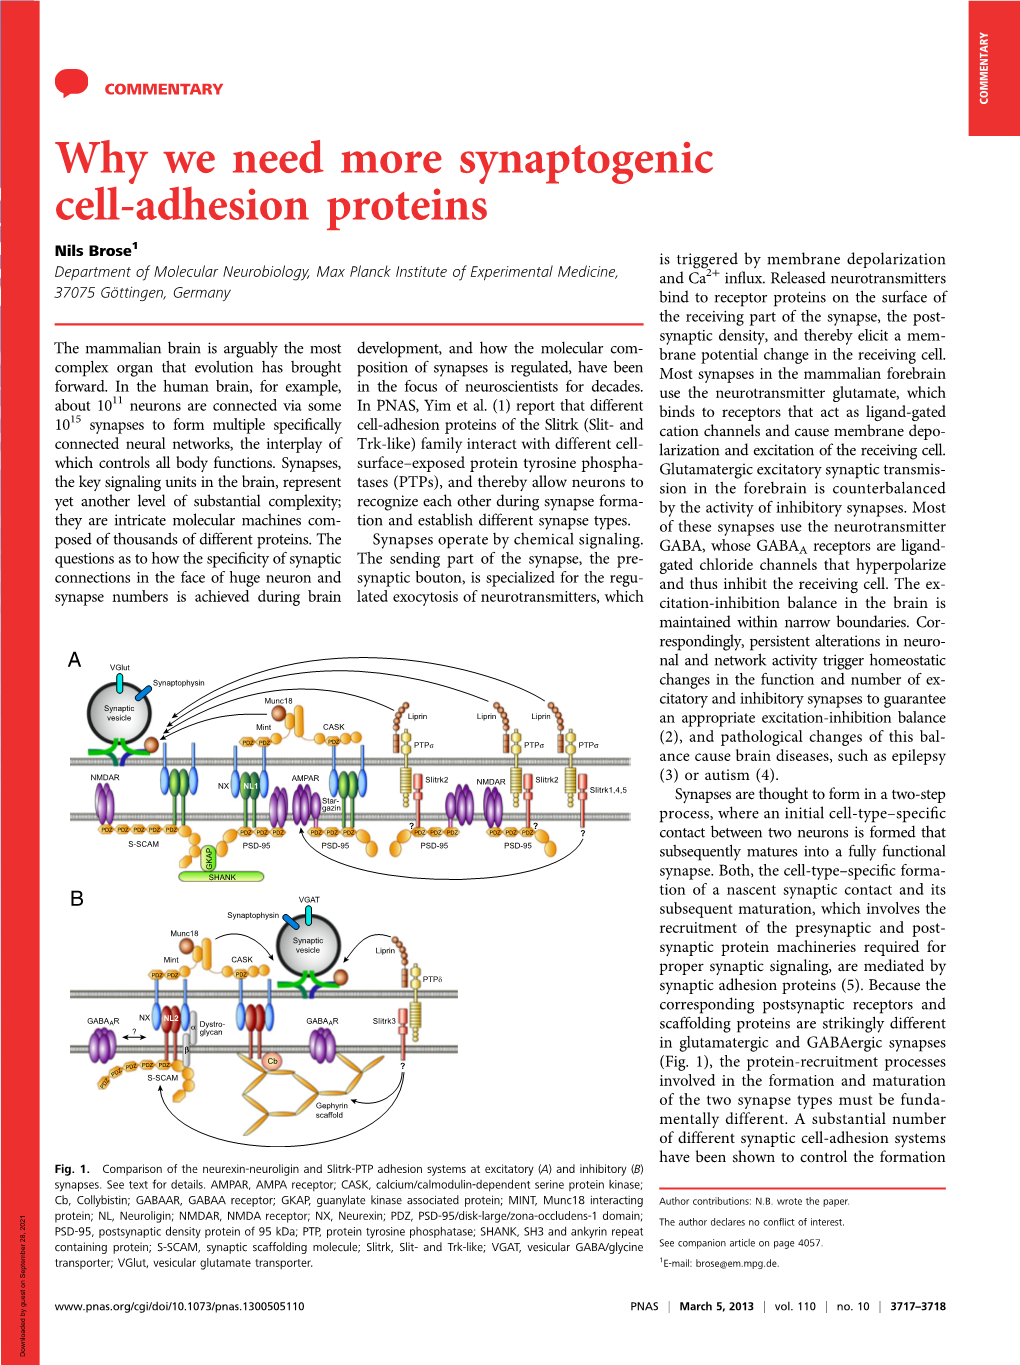 Why We Need More Synaptogenic Cell-Adhesion Proteins